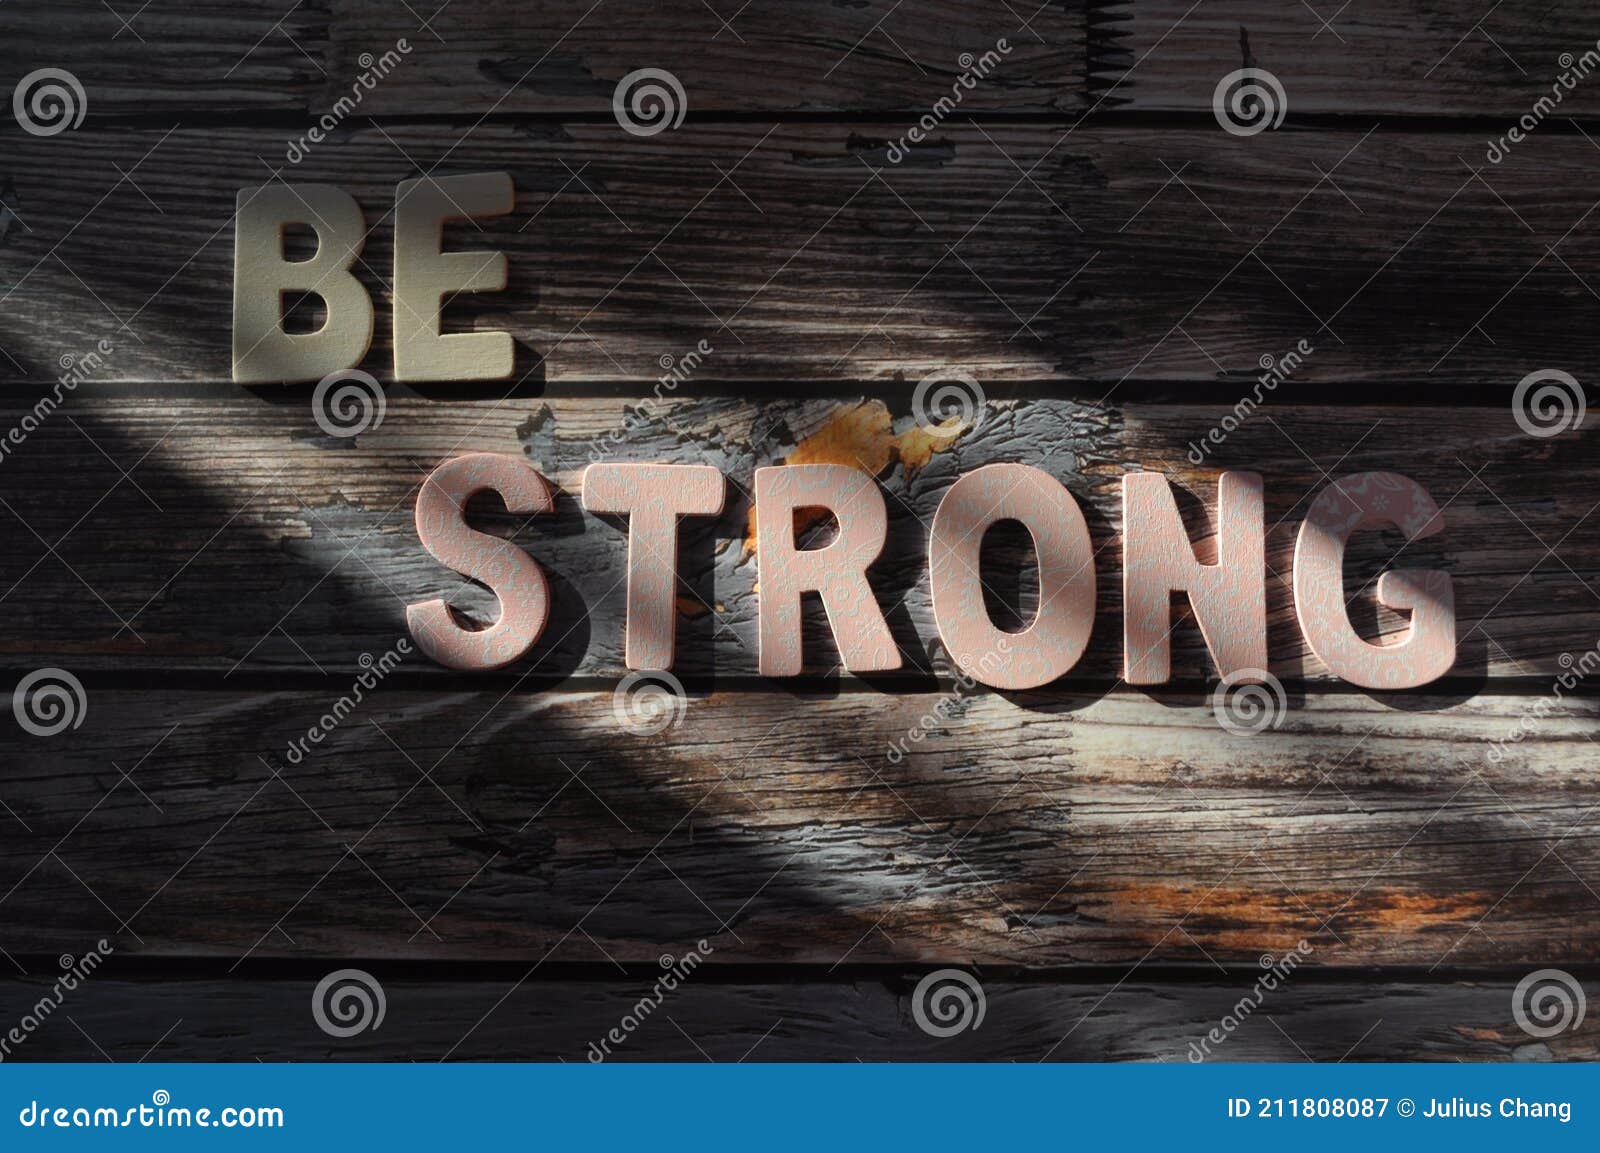 Inspirational Quotes Wallpaper or Poster Stock Image - Image of  motivational, hope: 211808087